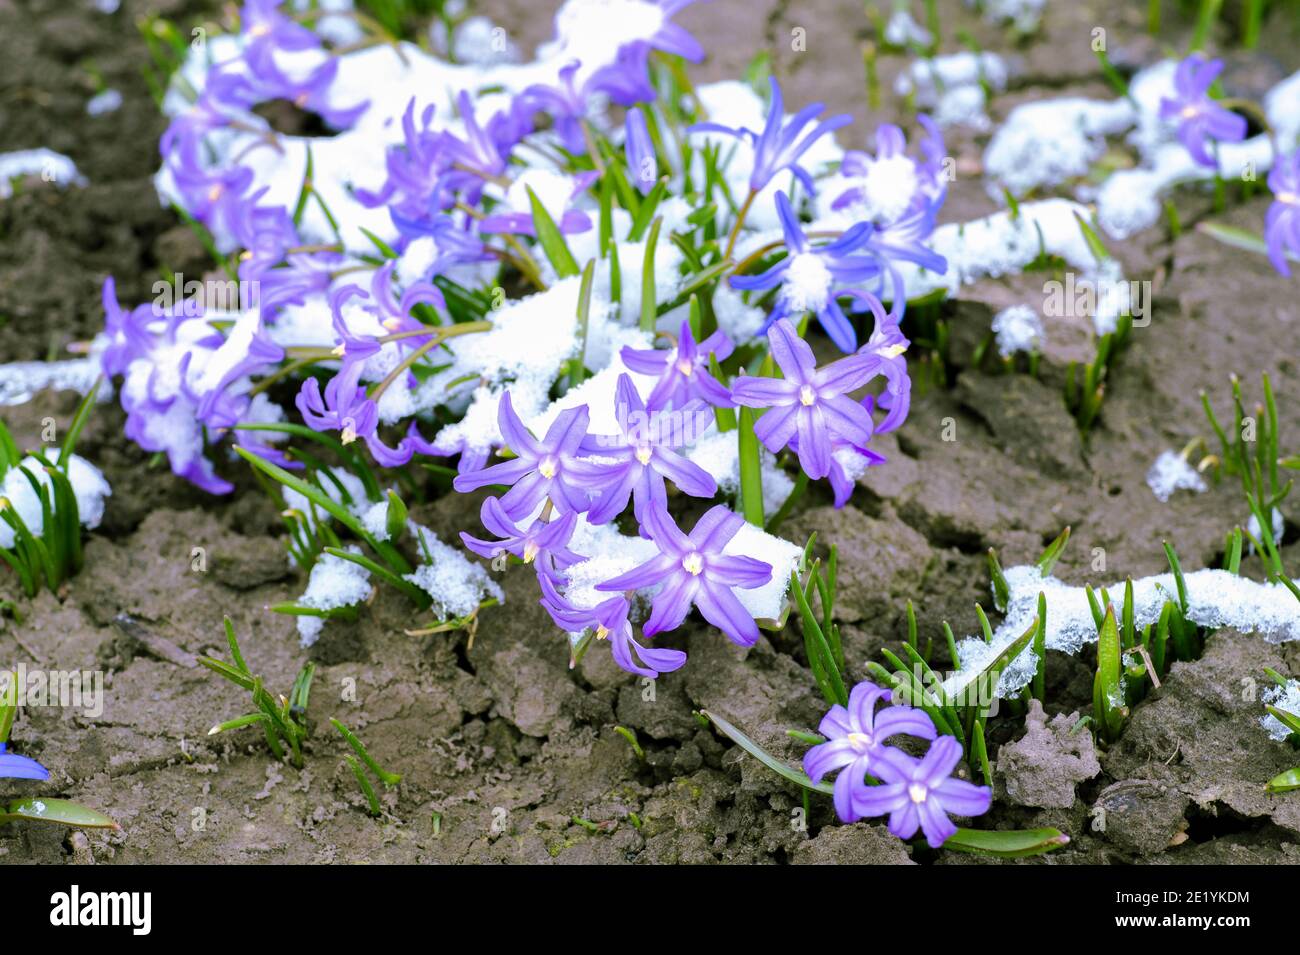 Pale pink snowdrops with a blue tint chionodoxa closeup with green leaves and partially covered with freshly fallen snow. Natural background Stock Photo